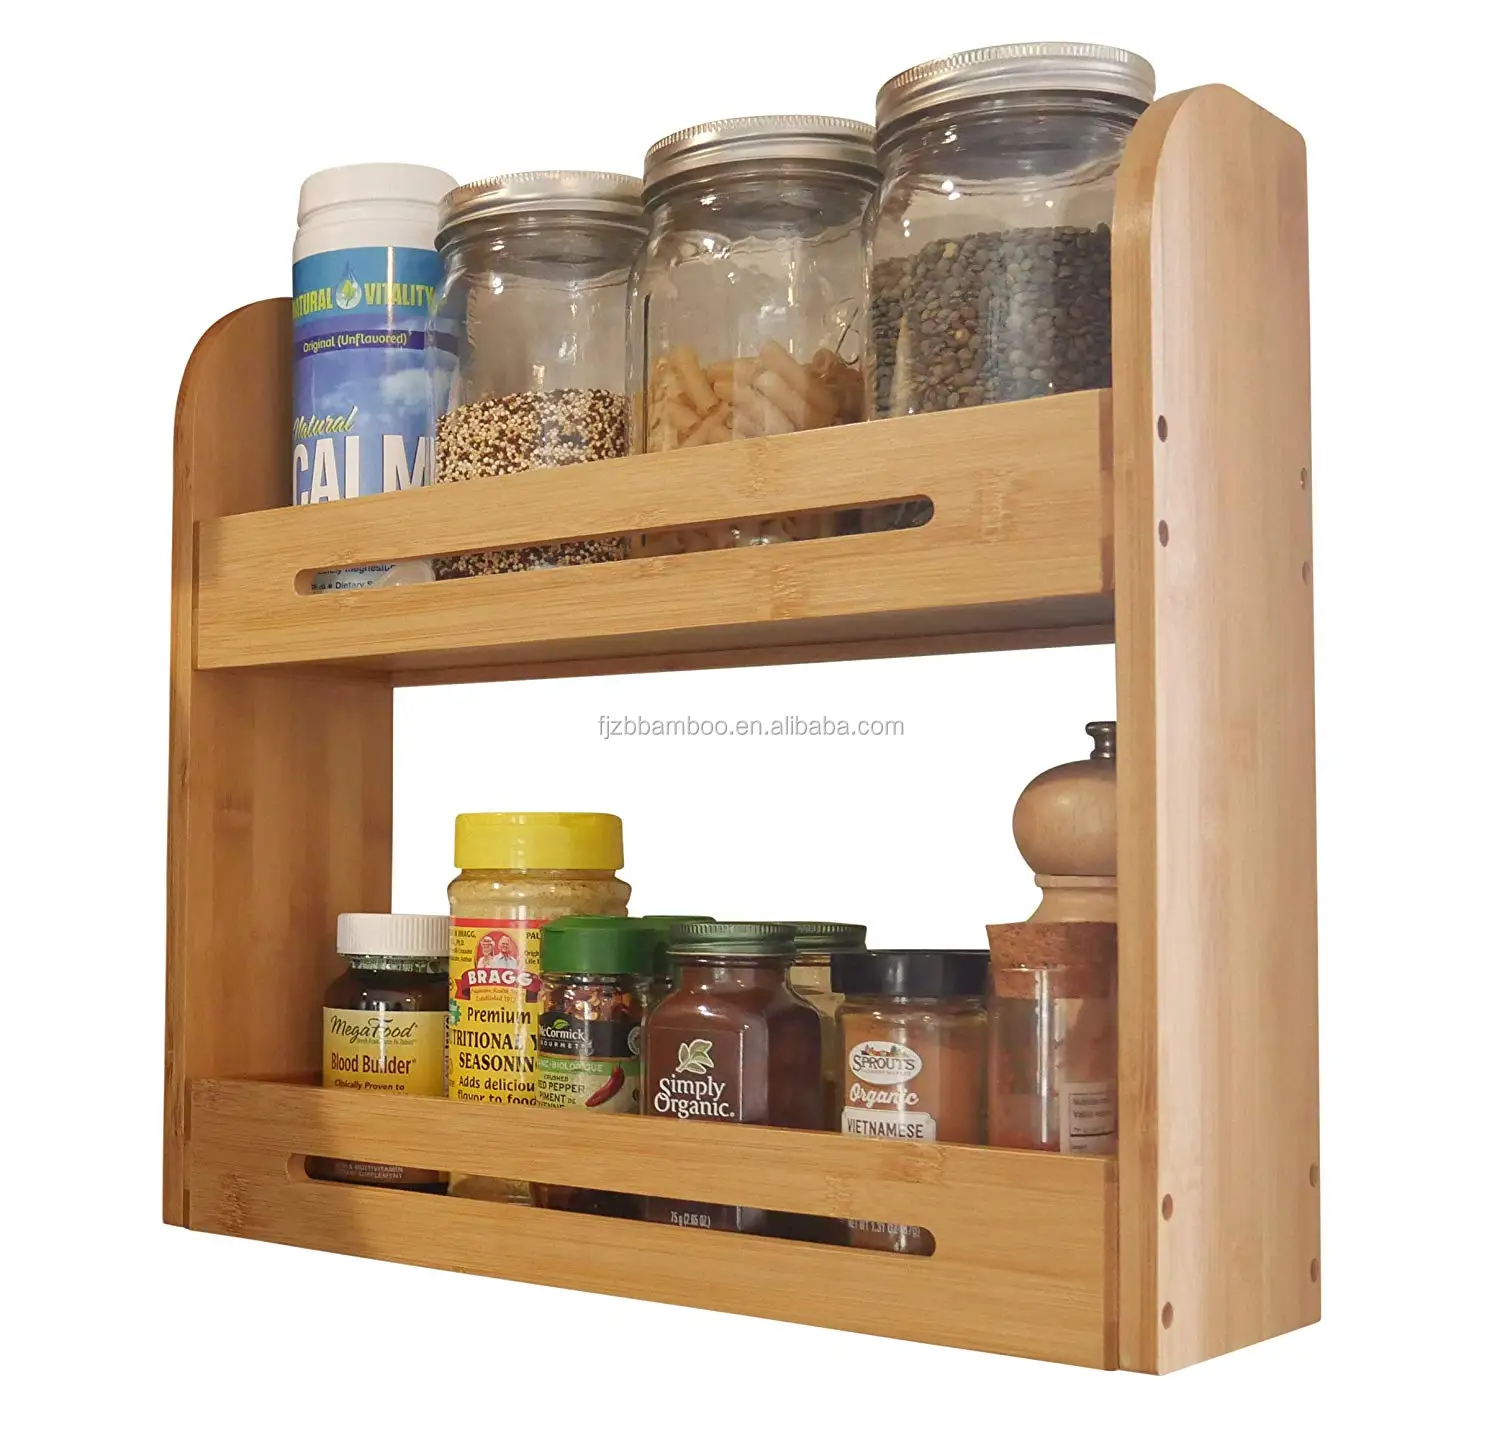 Large Bamboo Spice Rack Organizer Two Tiered Wooden Shelf Organizer For Counter Top And Wall Mounted Use Buy Bamboo Spice Rack Organizer Fancy Spice Racks Spice Organizer Product On Alibaba Com